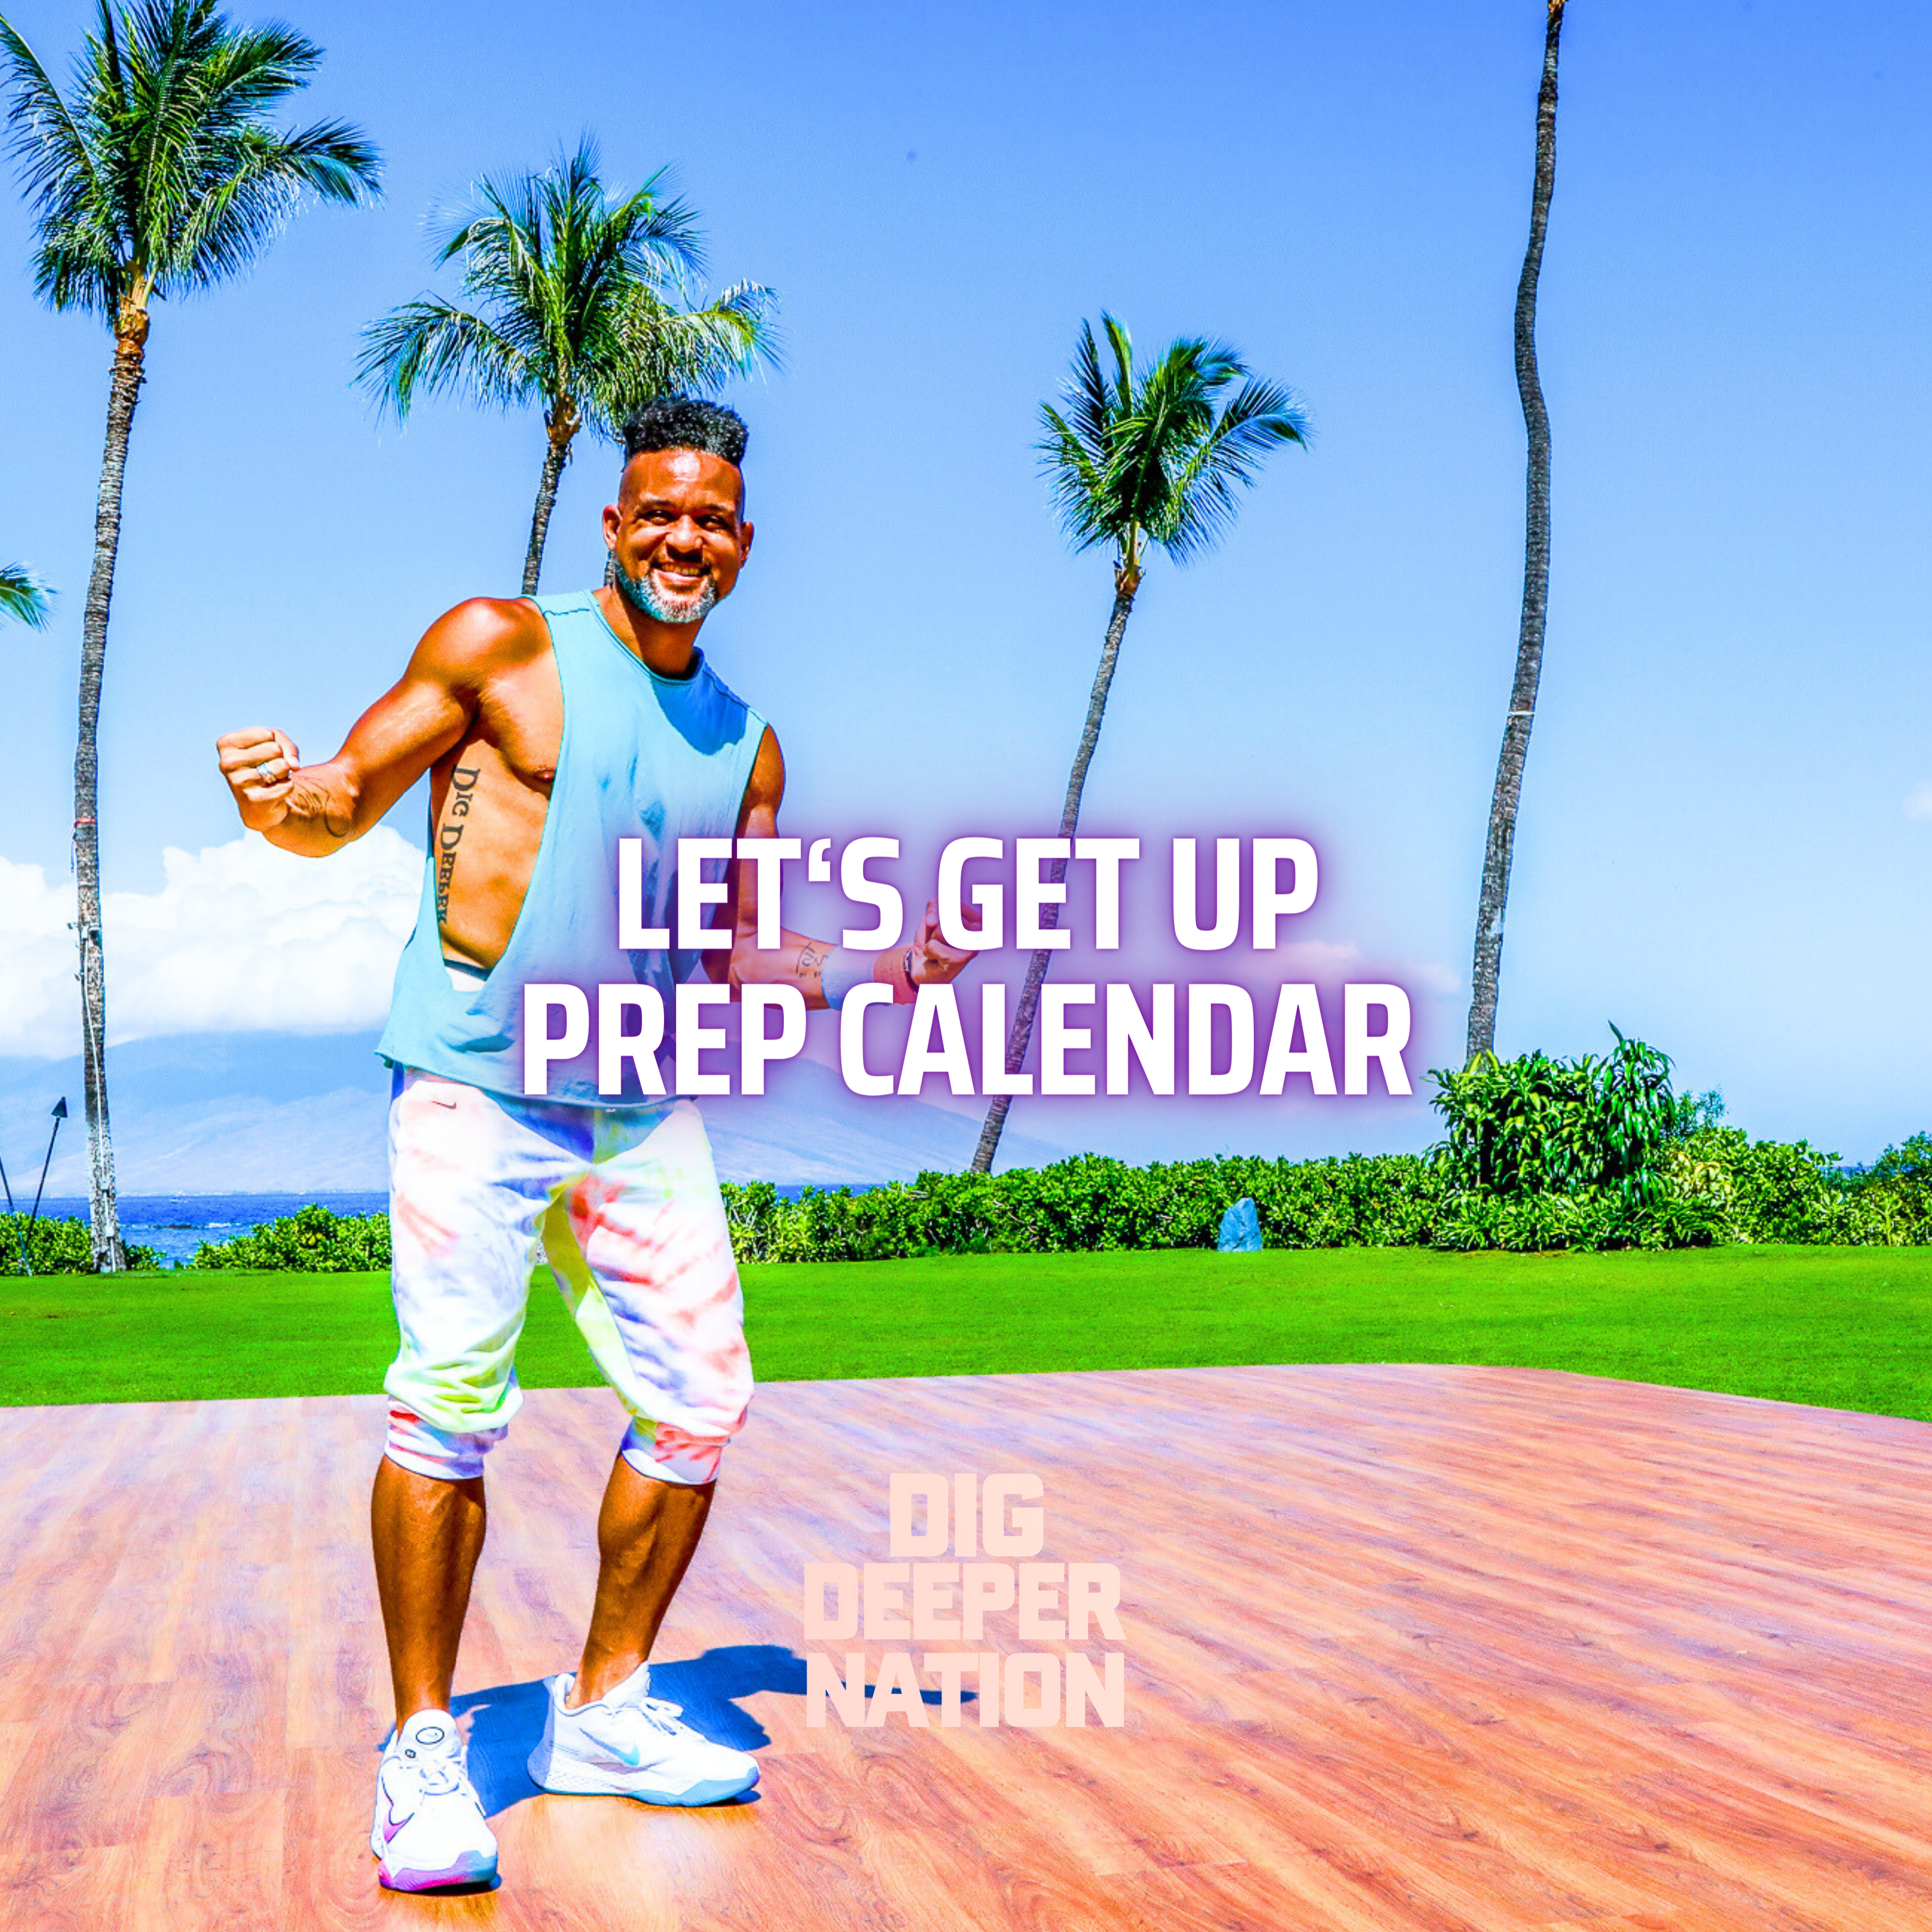 Let's Get Up Prep Calendar thumbnail, neon purple text, white dig deeper nation logo, photo in background of Shaun T flexing on a stage in front of palm trees